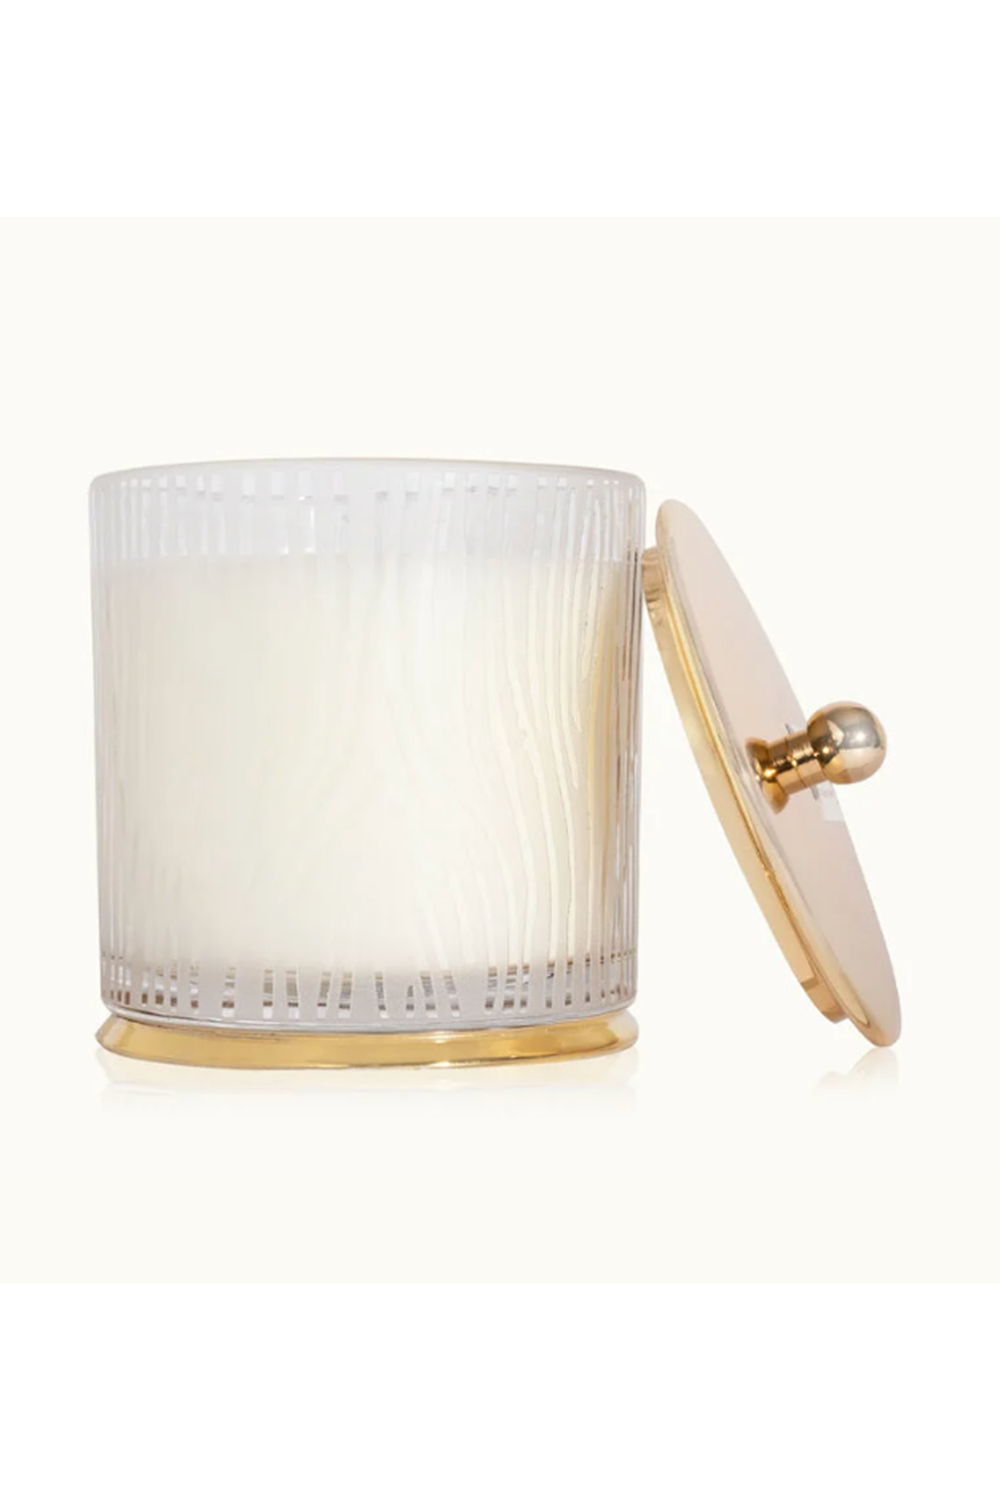 Frasier Fir Candle - Frosted Wood Grain